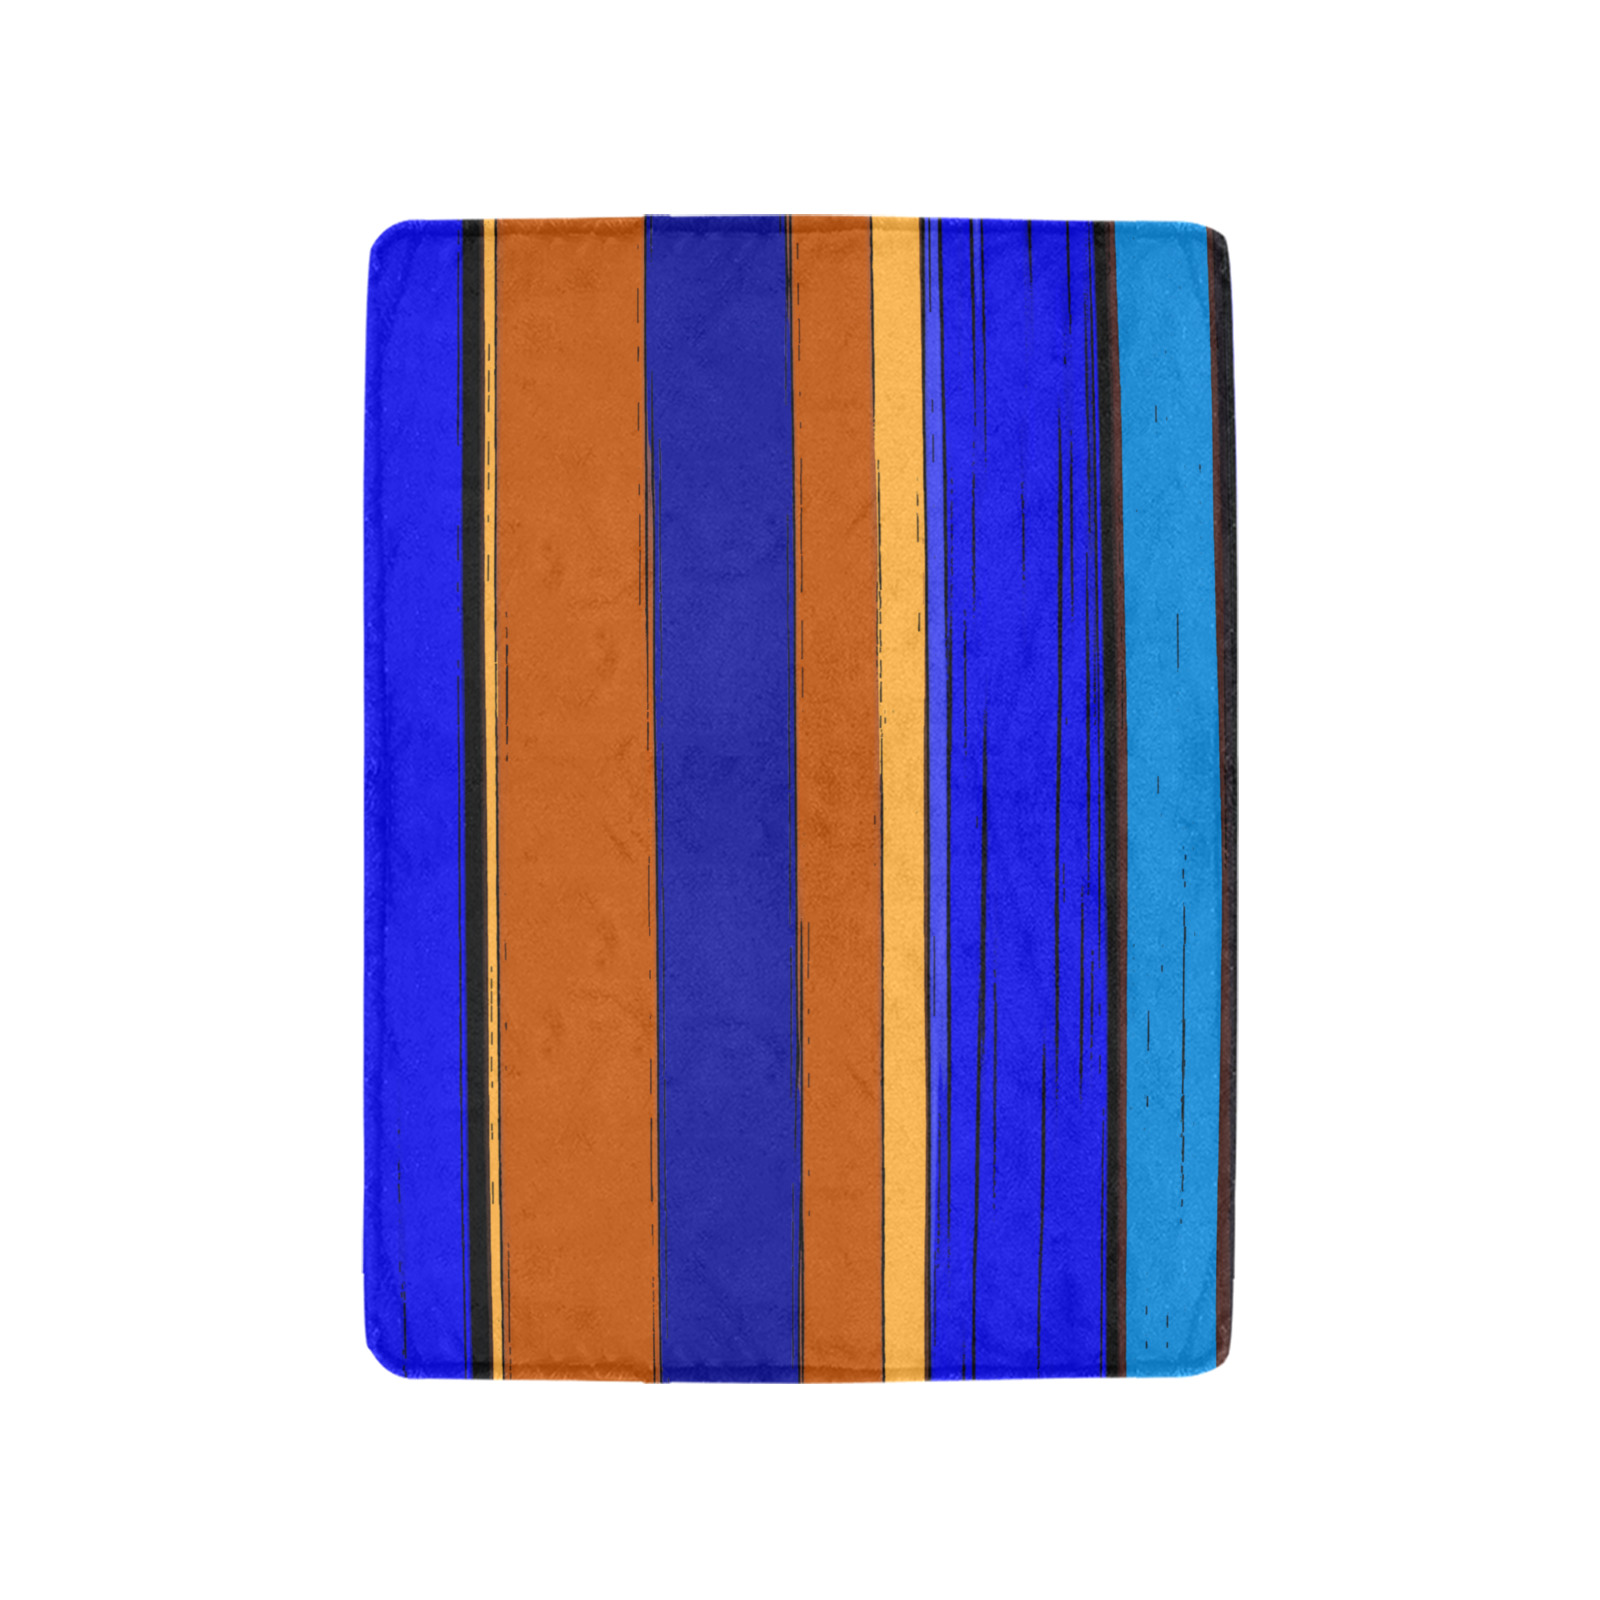 Abstract Blue And Orange 930 Ultra-Soft Micro Fleece Blanket 30"x40" (Thick)